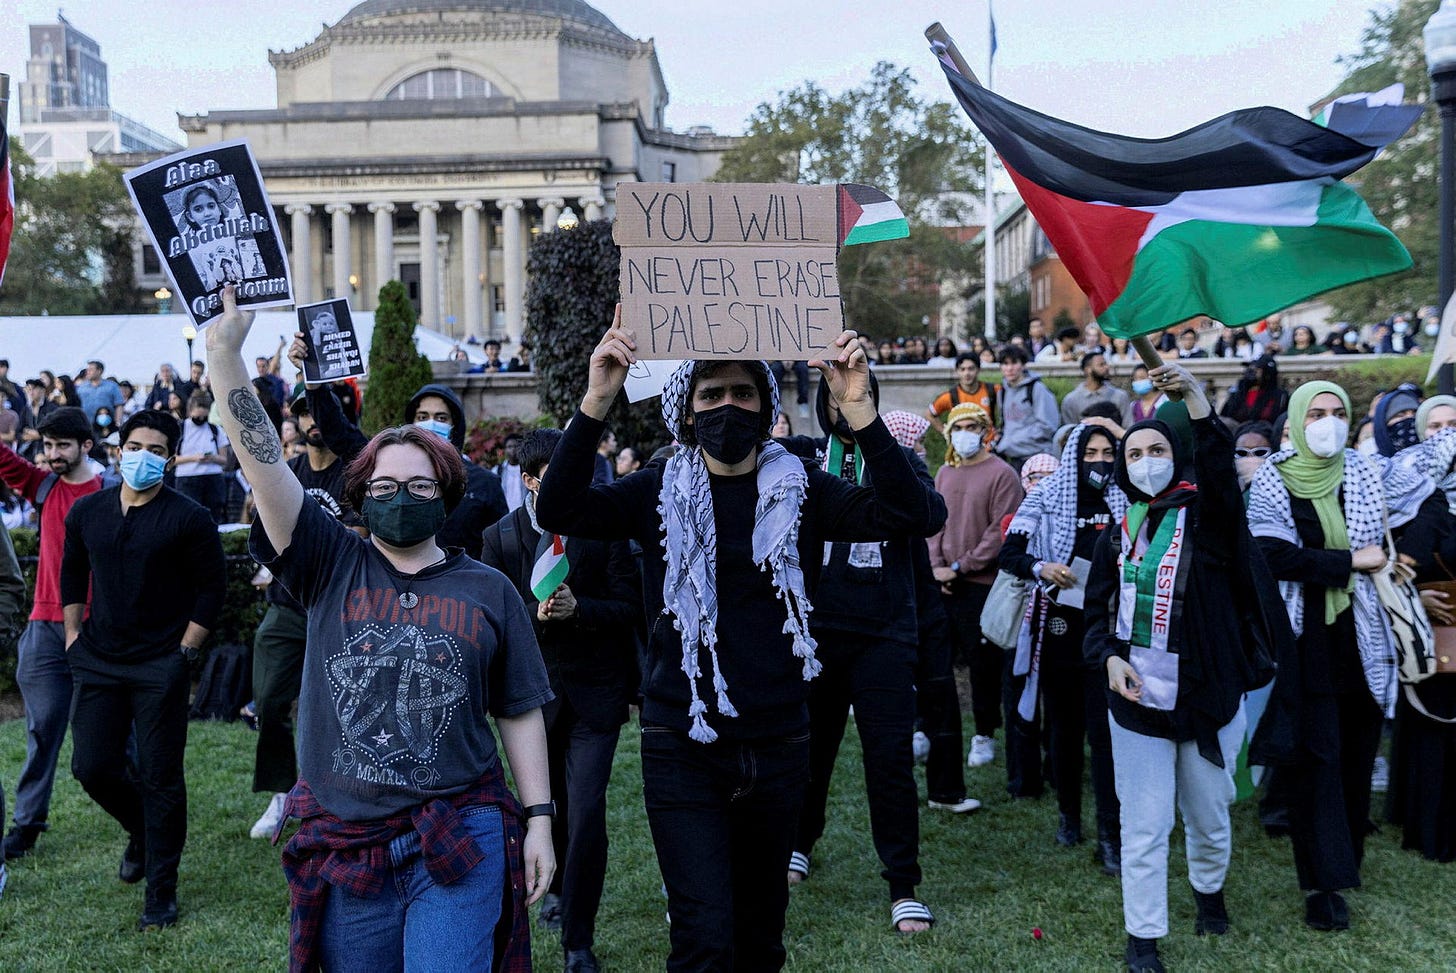 Two pro-Palestinian Groups Spearheading anti-Israel Protests at Columbia  Suspended - U.S. News - Haaretz.com